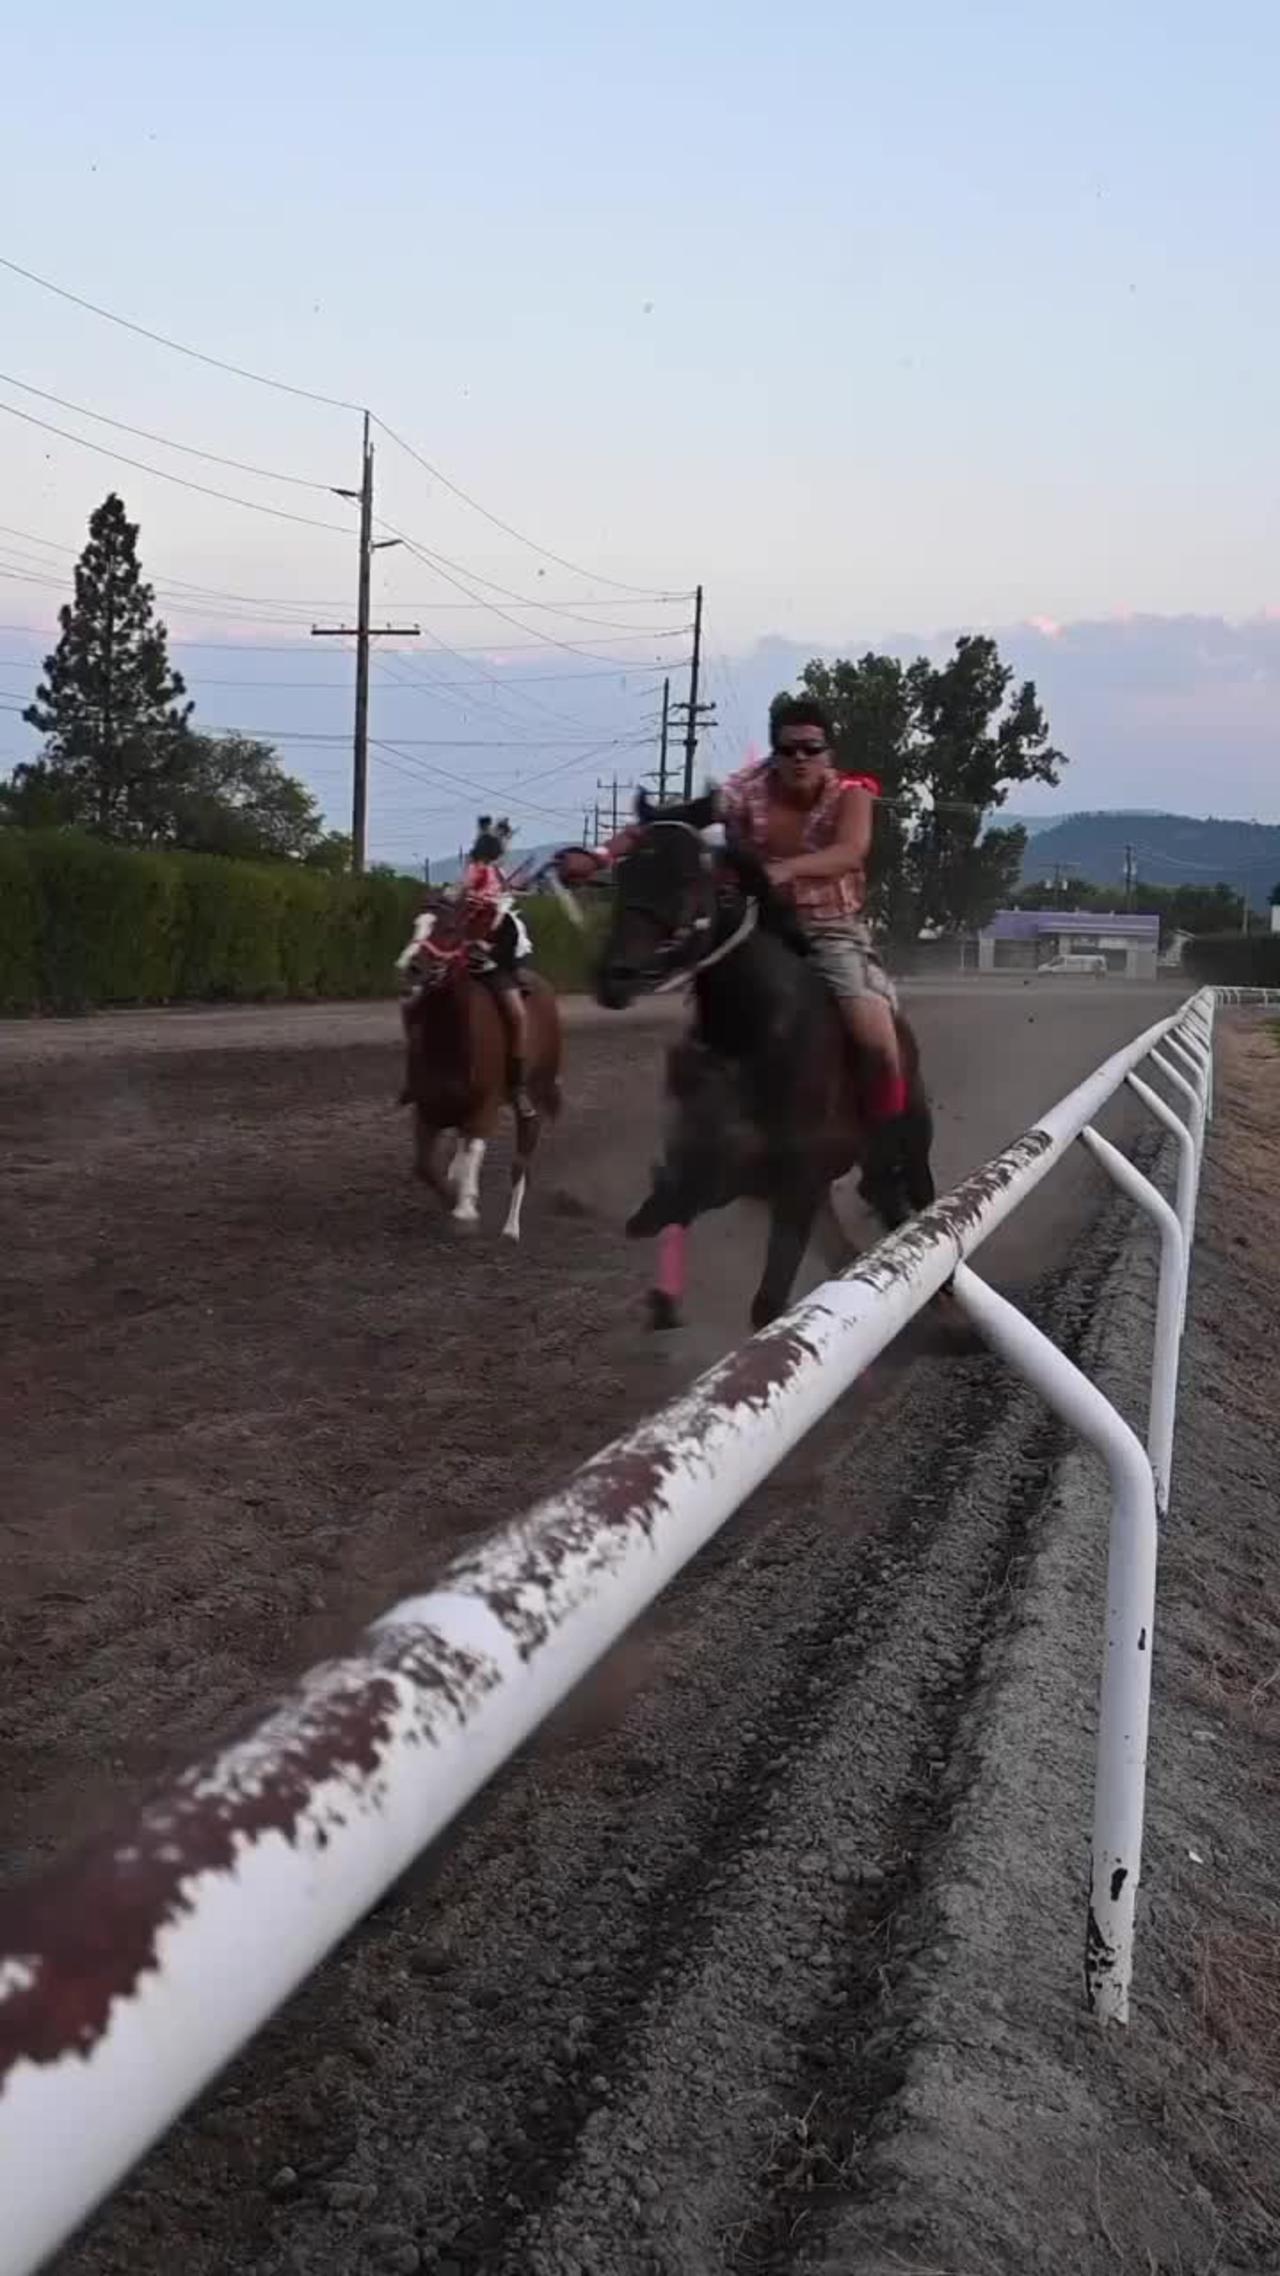 Indian relay is an Indigenous-only race done bareback on horses captured here by . A